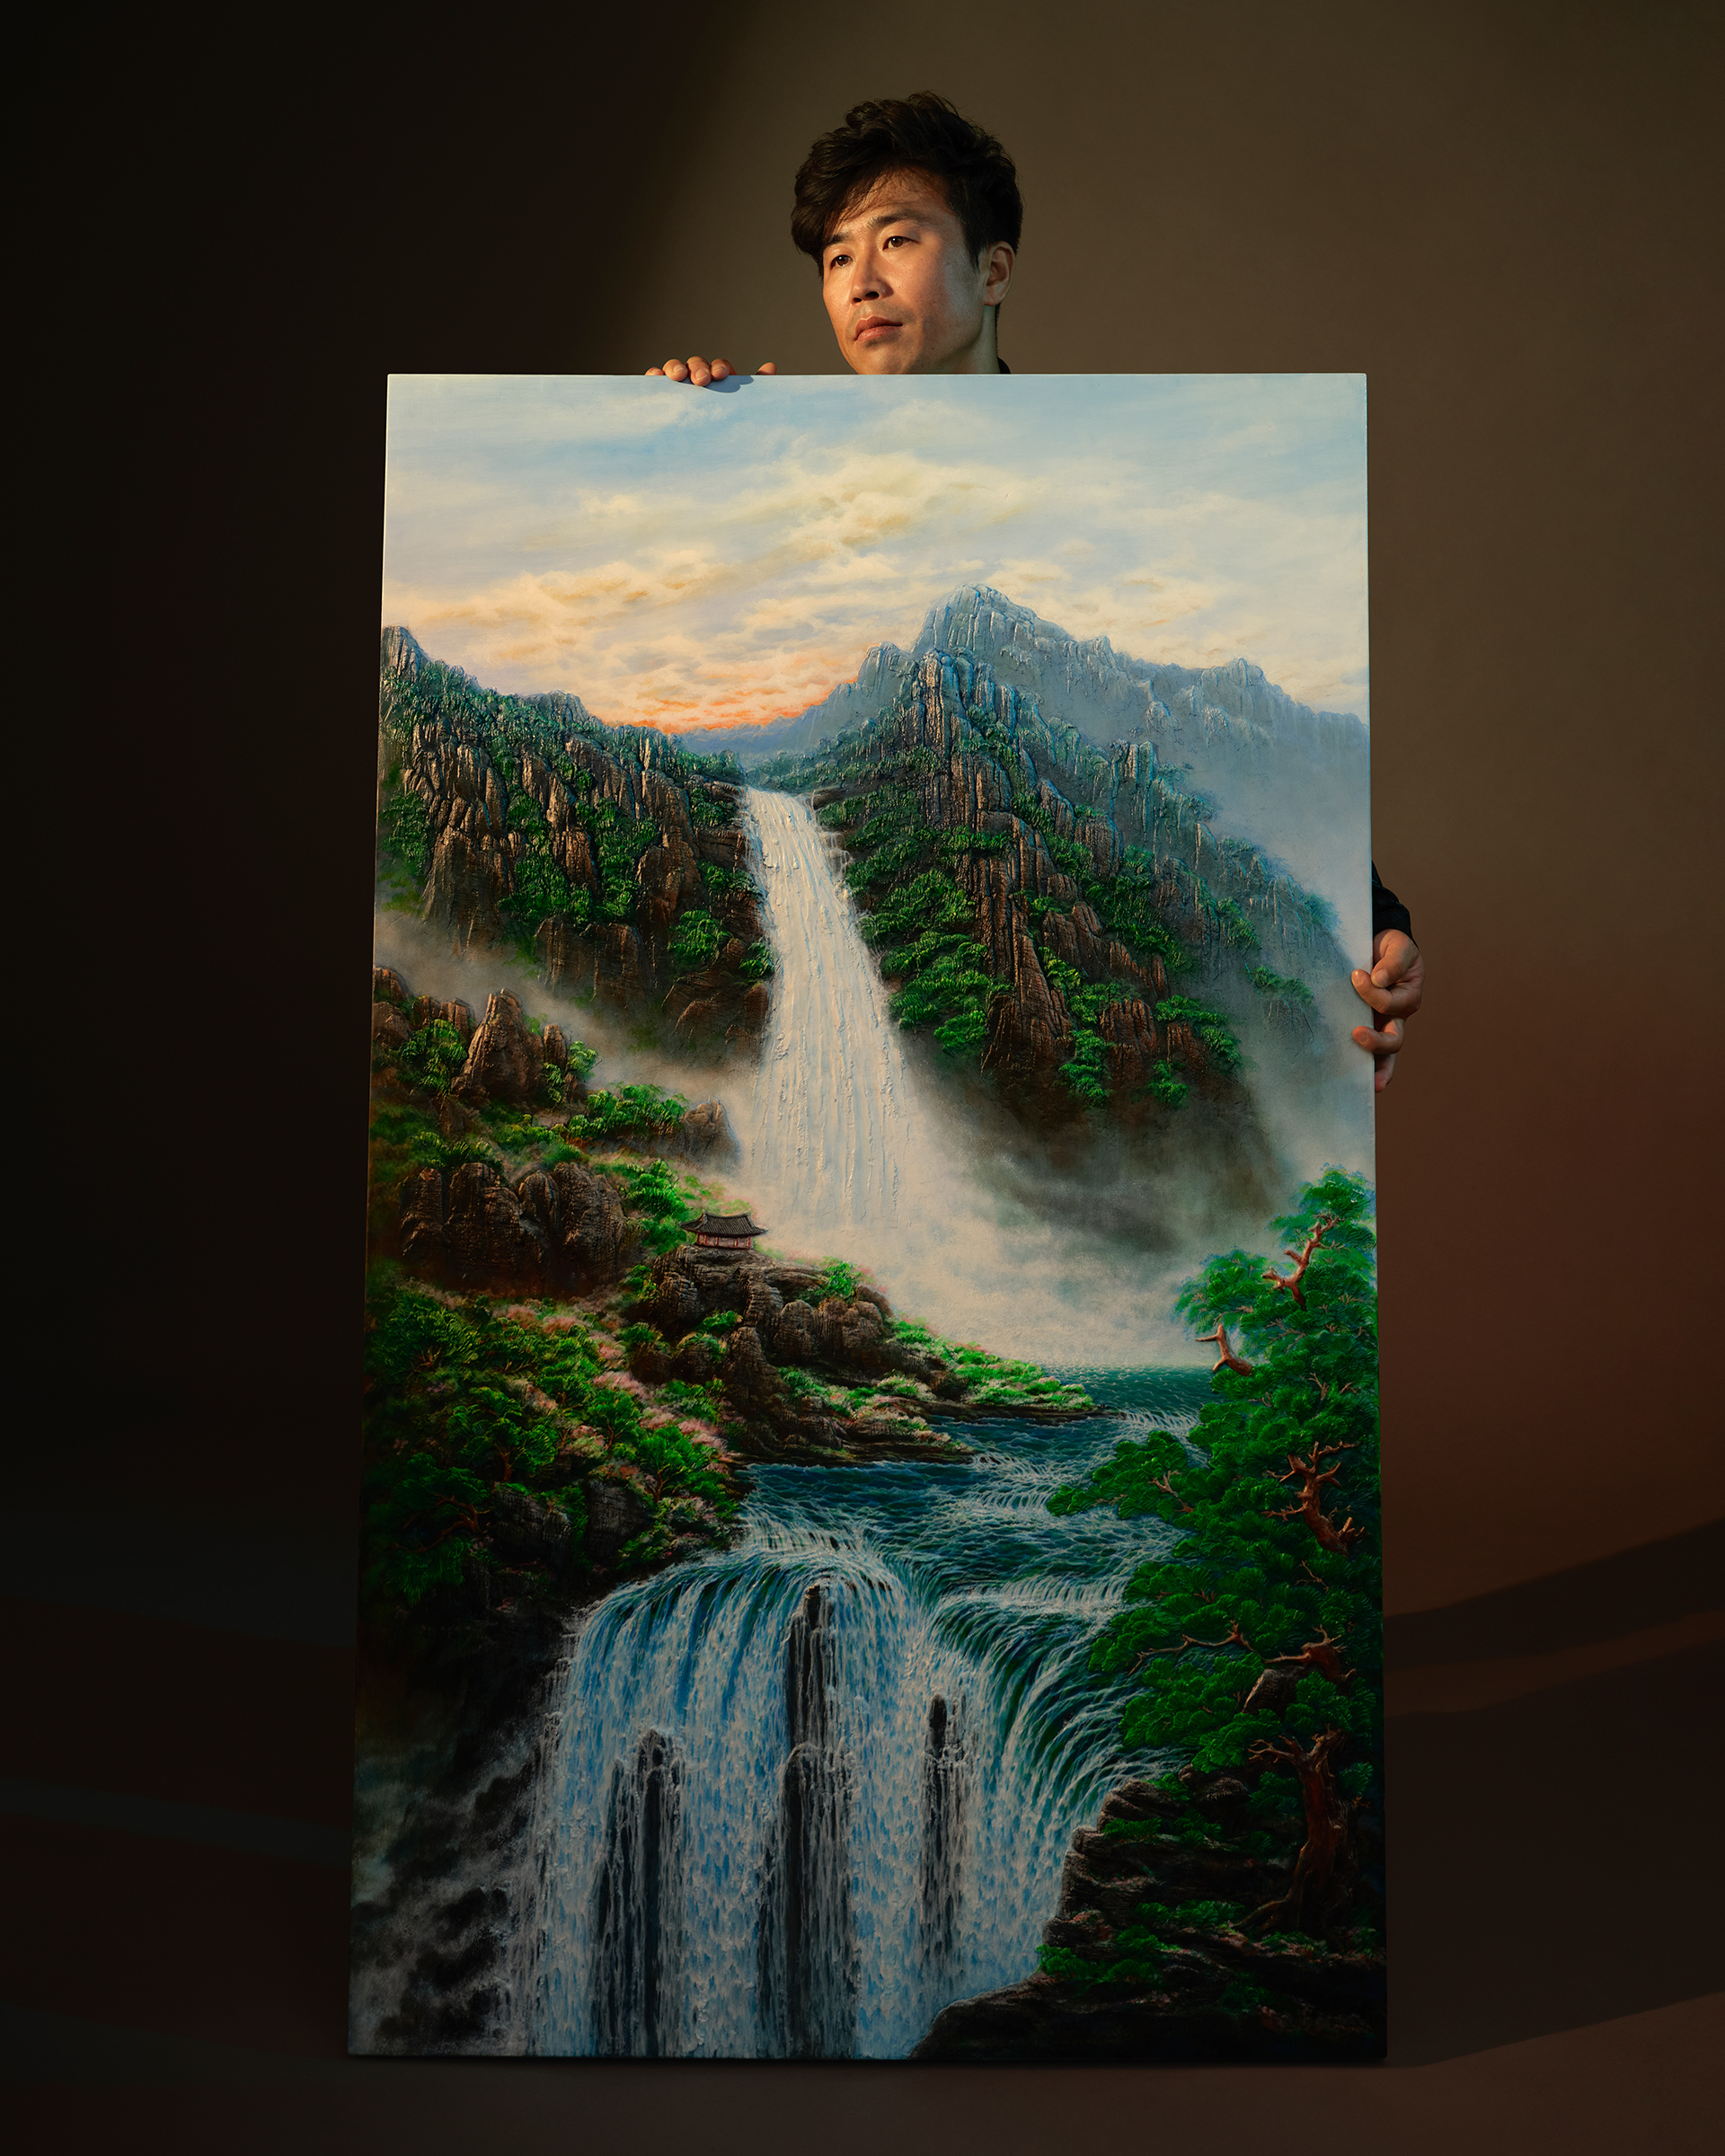 Artist Surl Lee, photographed alongside his artwork on Sept. 9. Lee says what he misses most about North Korea are the beautiful waterfalls. (Catherine Hyland for TIME)